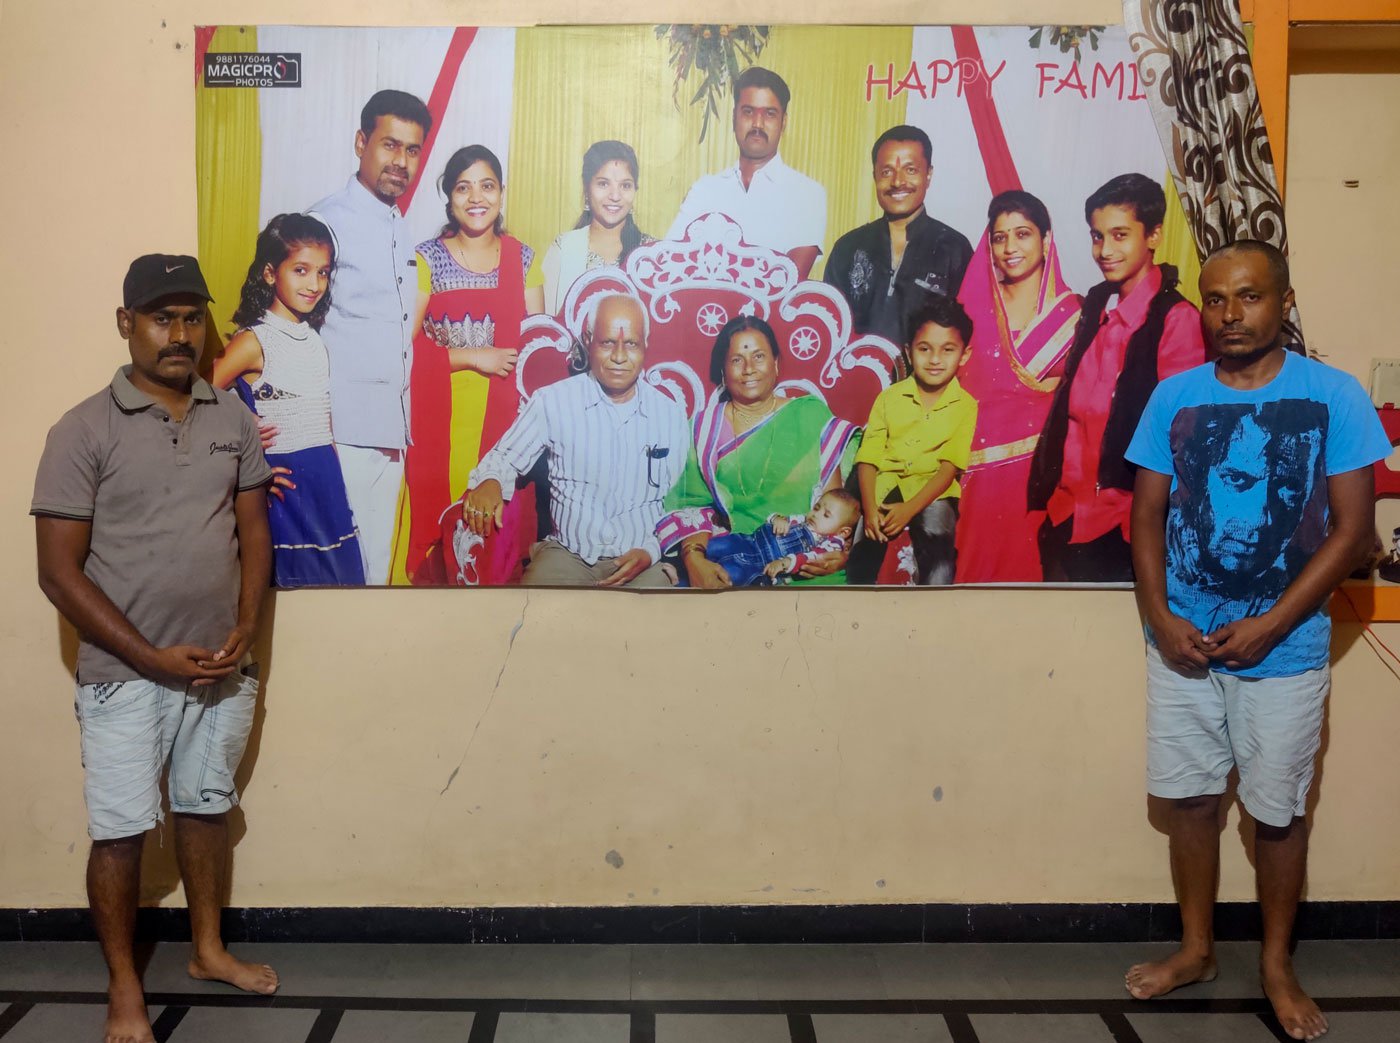 Left: Rushikesh Kate and his brother Mahesh (right) with their family portrait. Right: Rushikesh says their parents' death was unexpected